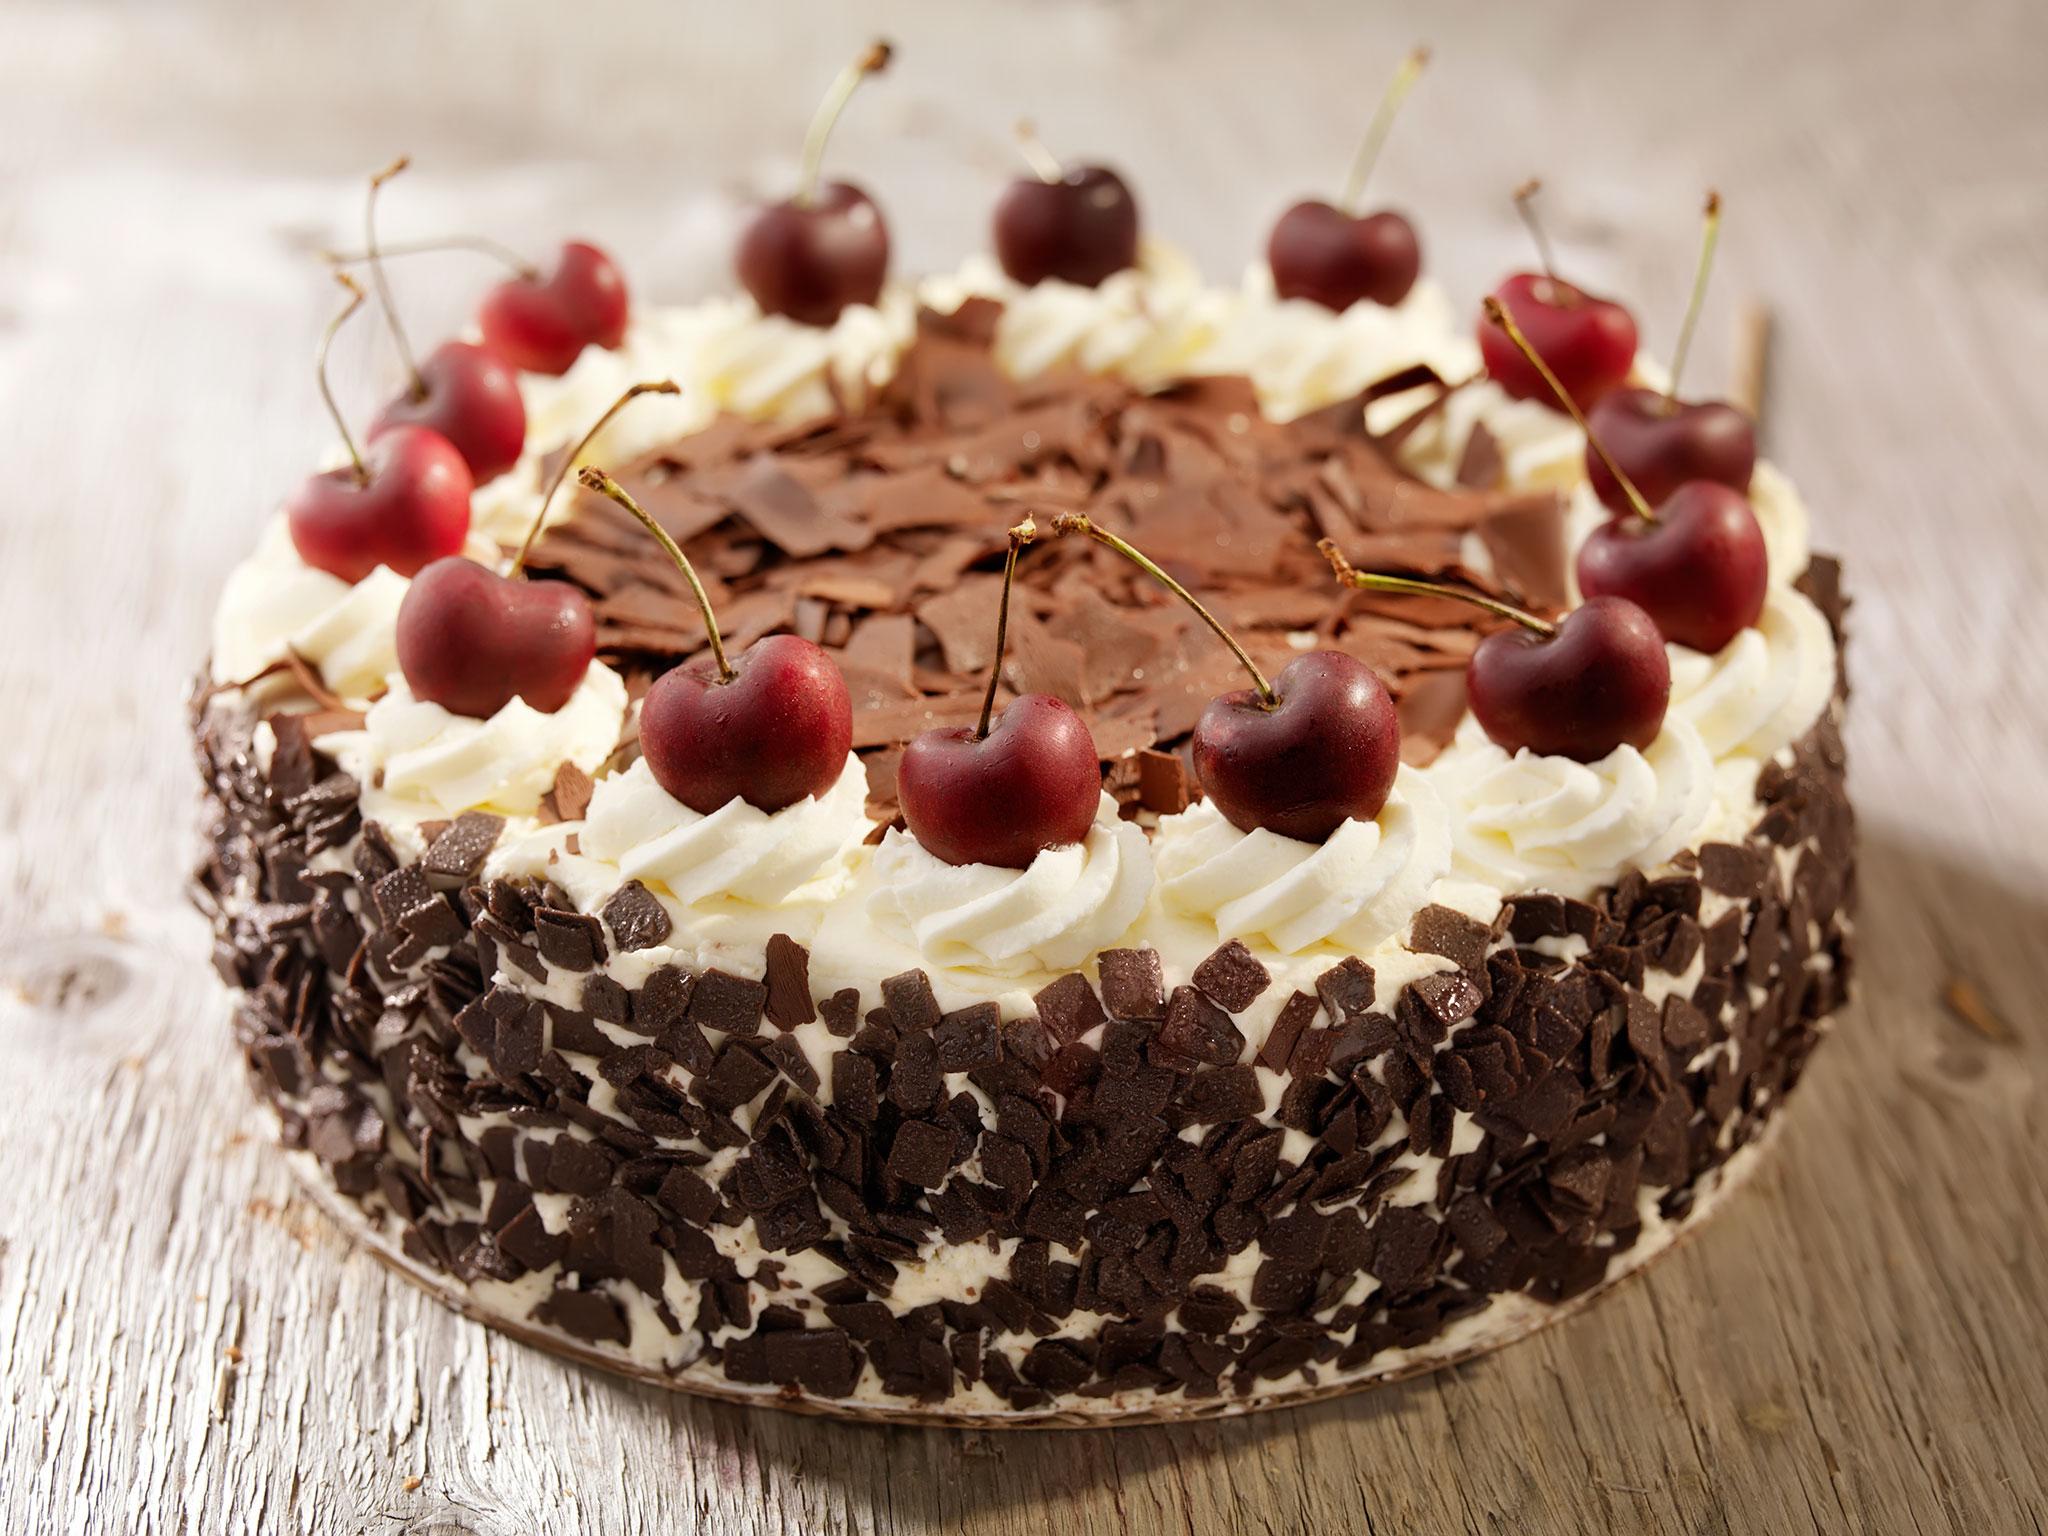 The black forest gateau was highly popular in the Seventies